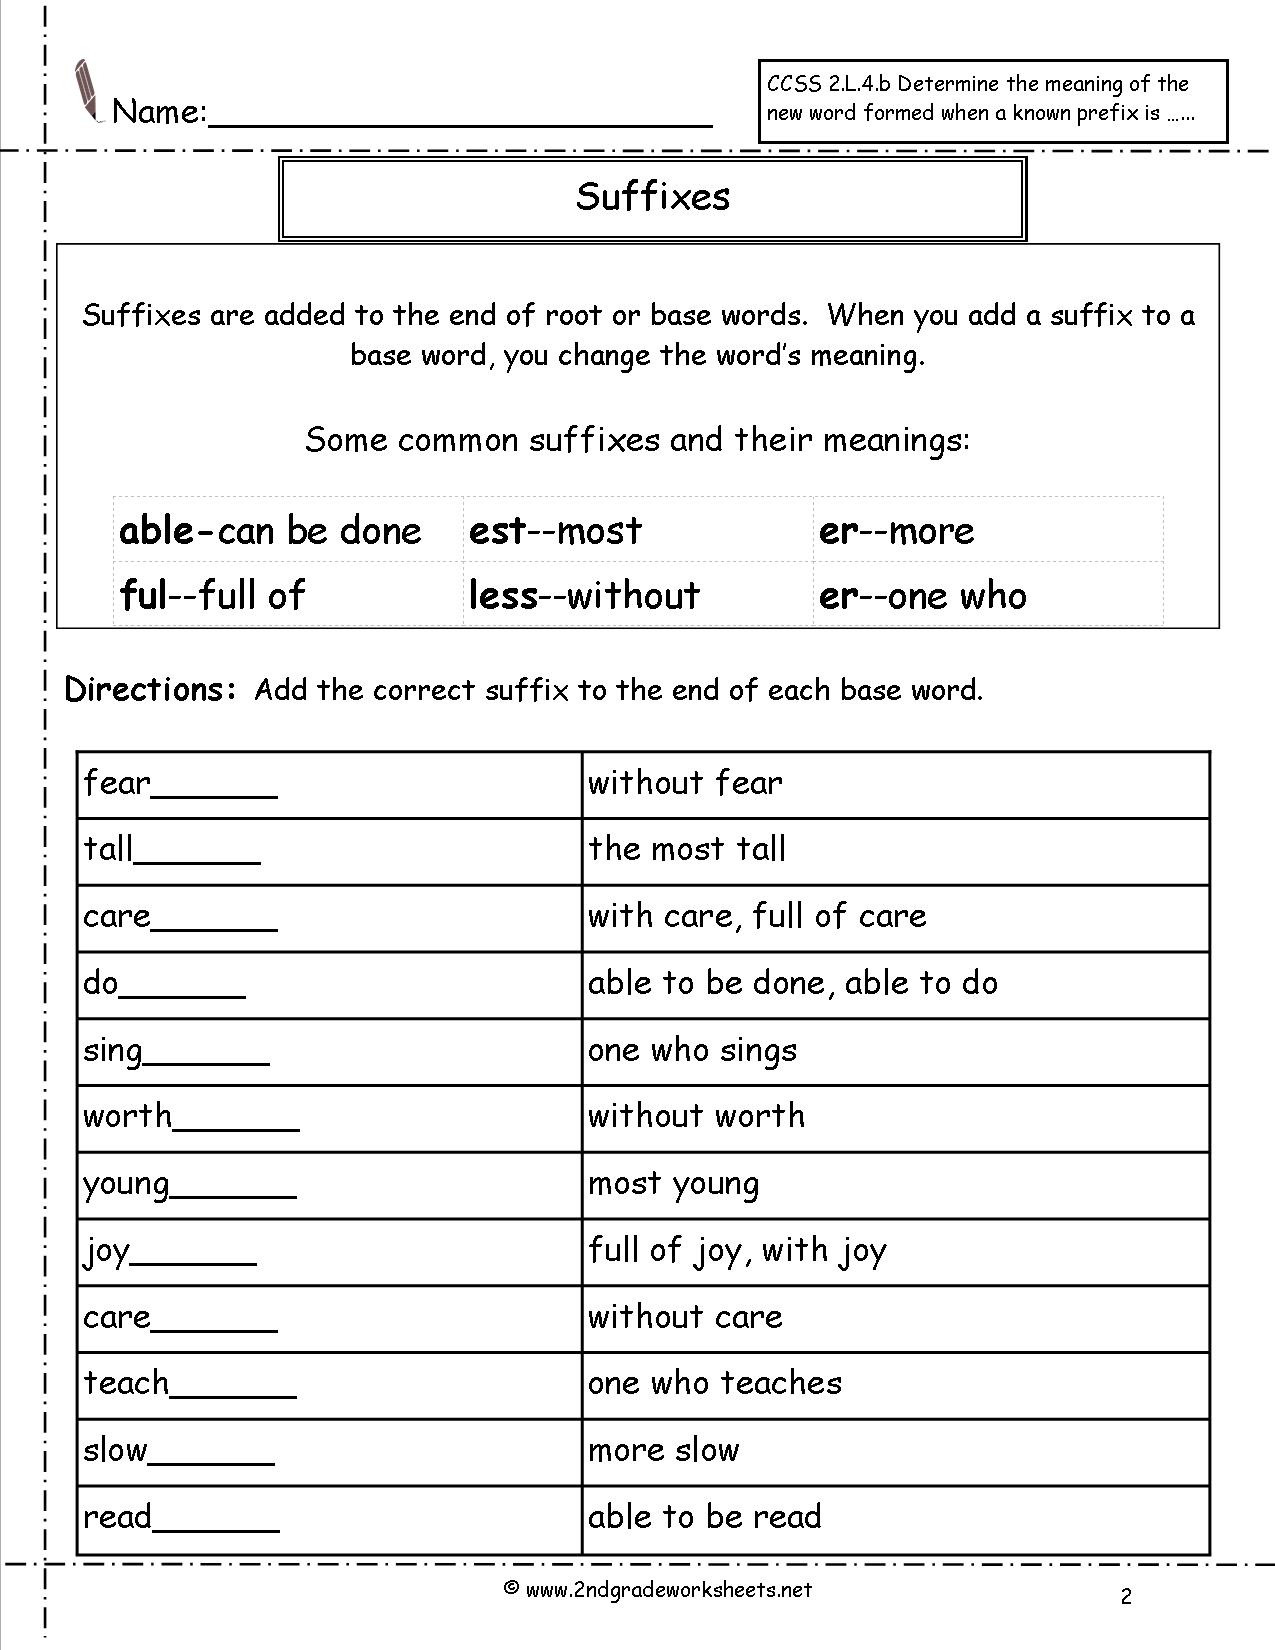 suffixes-choose-the-correct-answer-suffixes-worksheets-suffix-grammar-worksheets